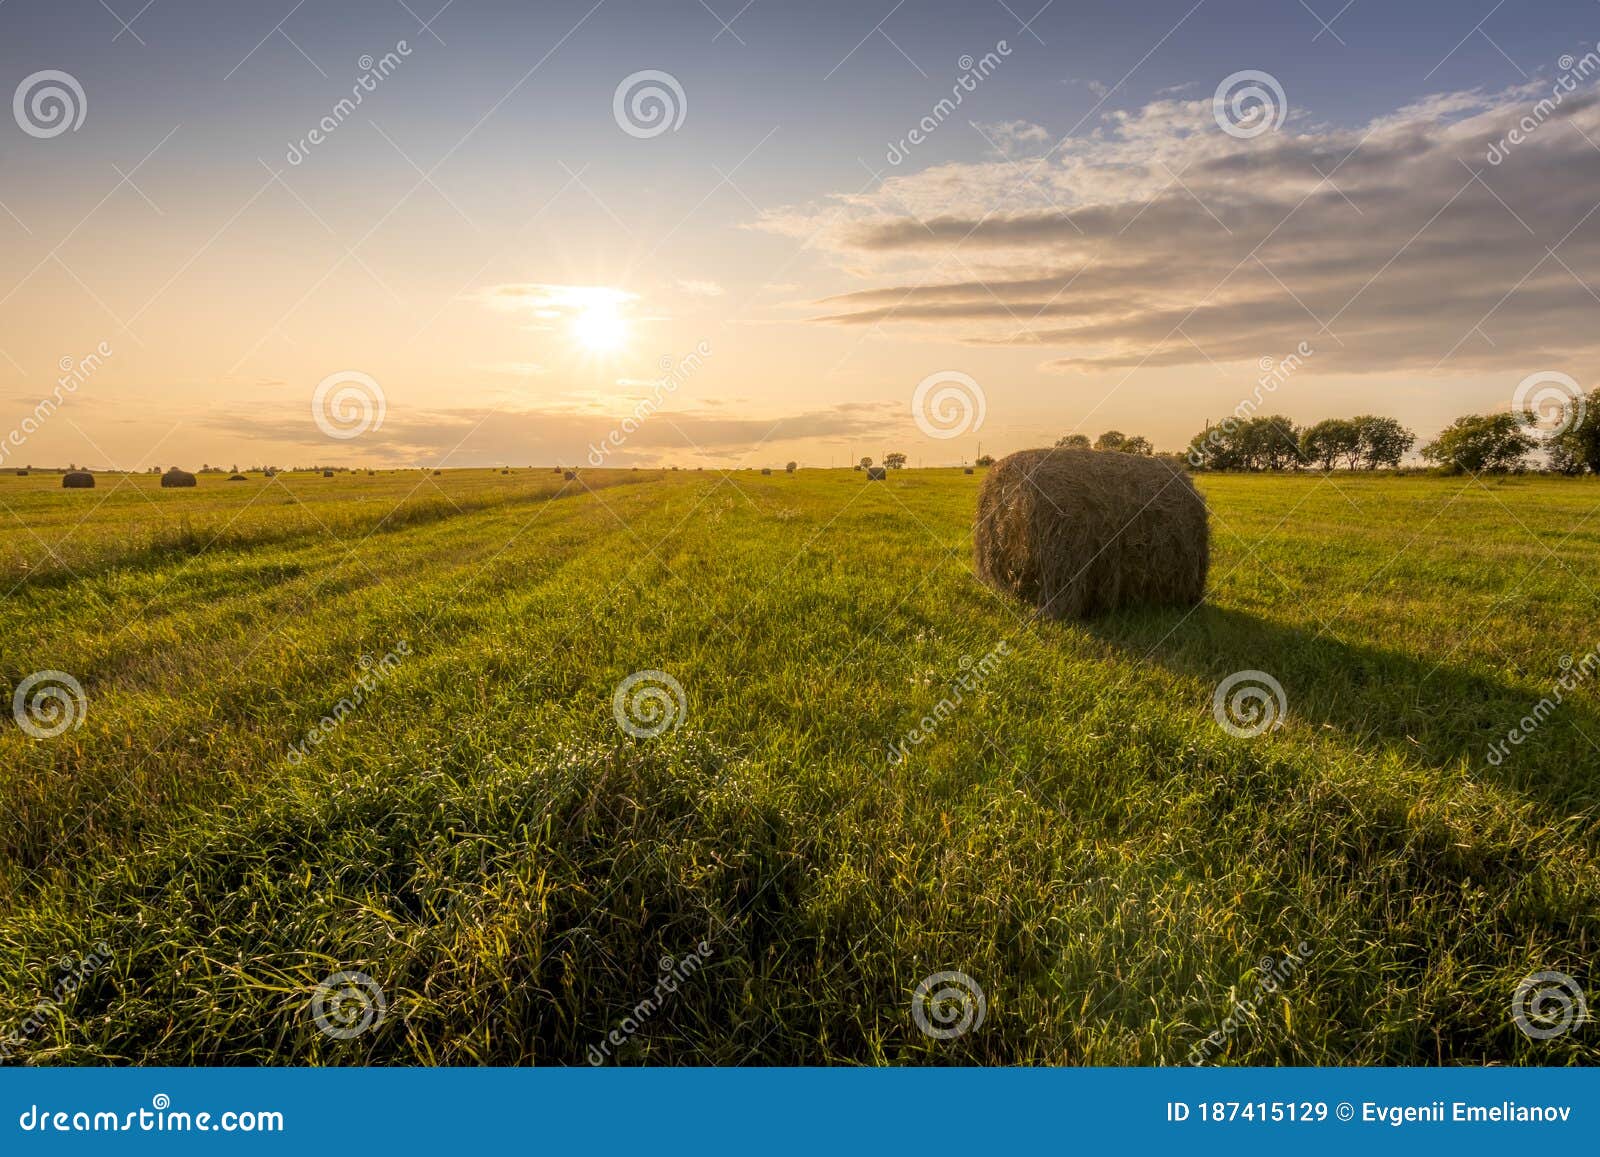 A Field With Haystacks On A Sunset On A Summer Evening Stock Image